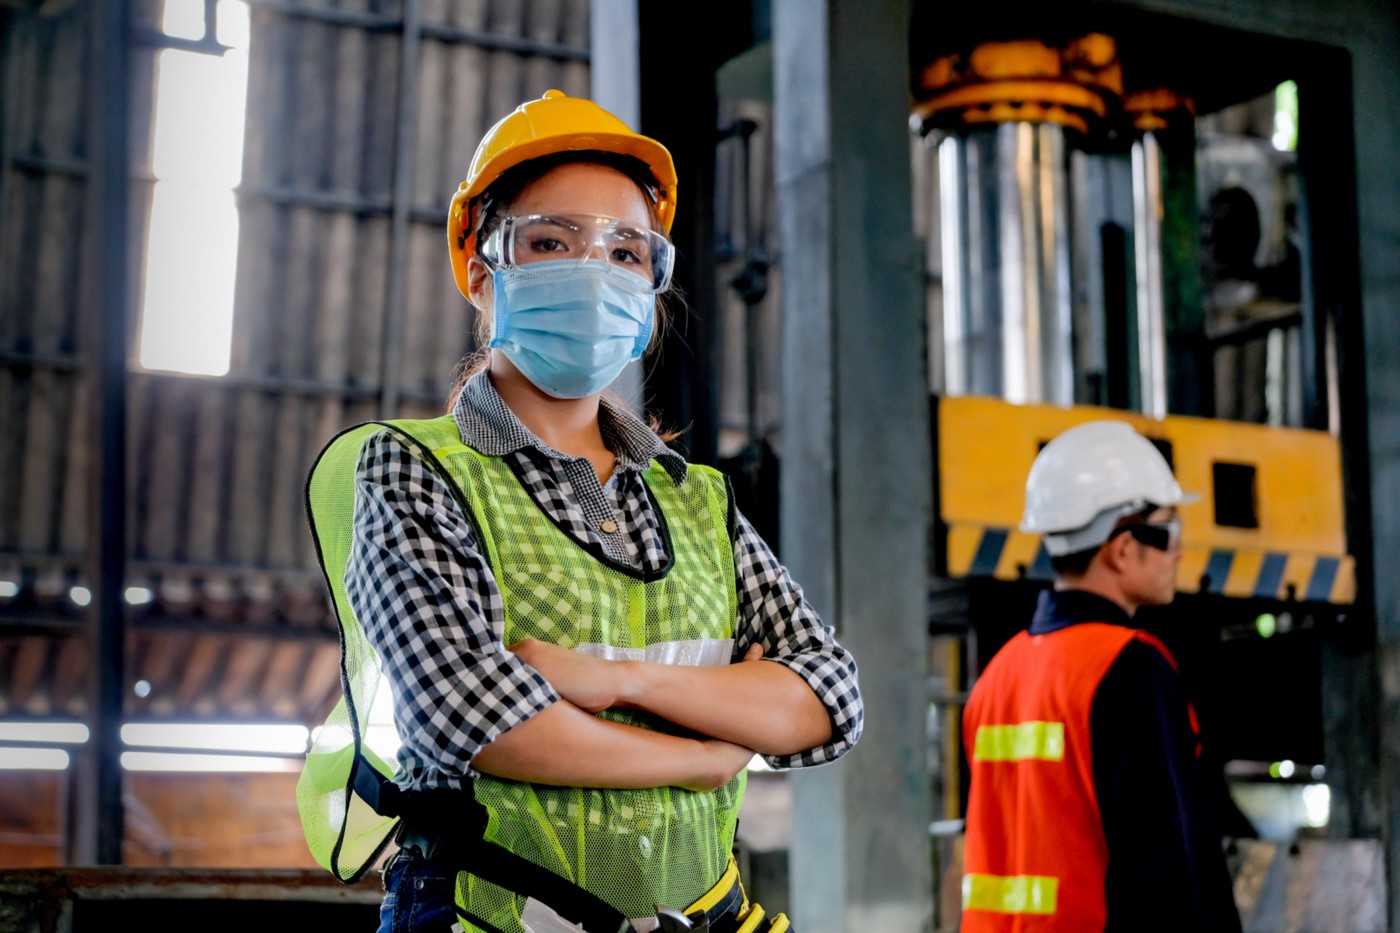 A woman wearing a face mask and construction helmet stands with arms crossed confidently.